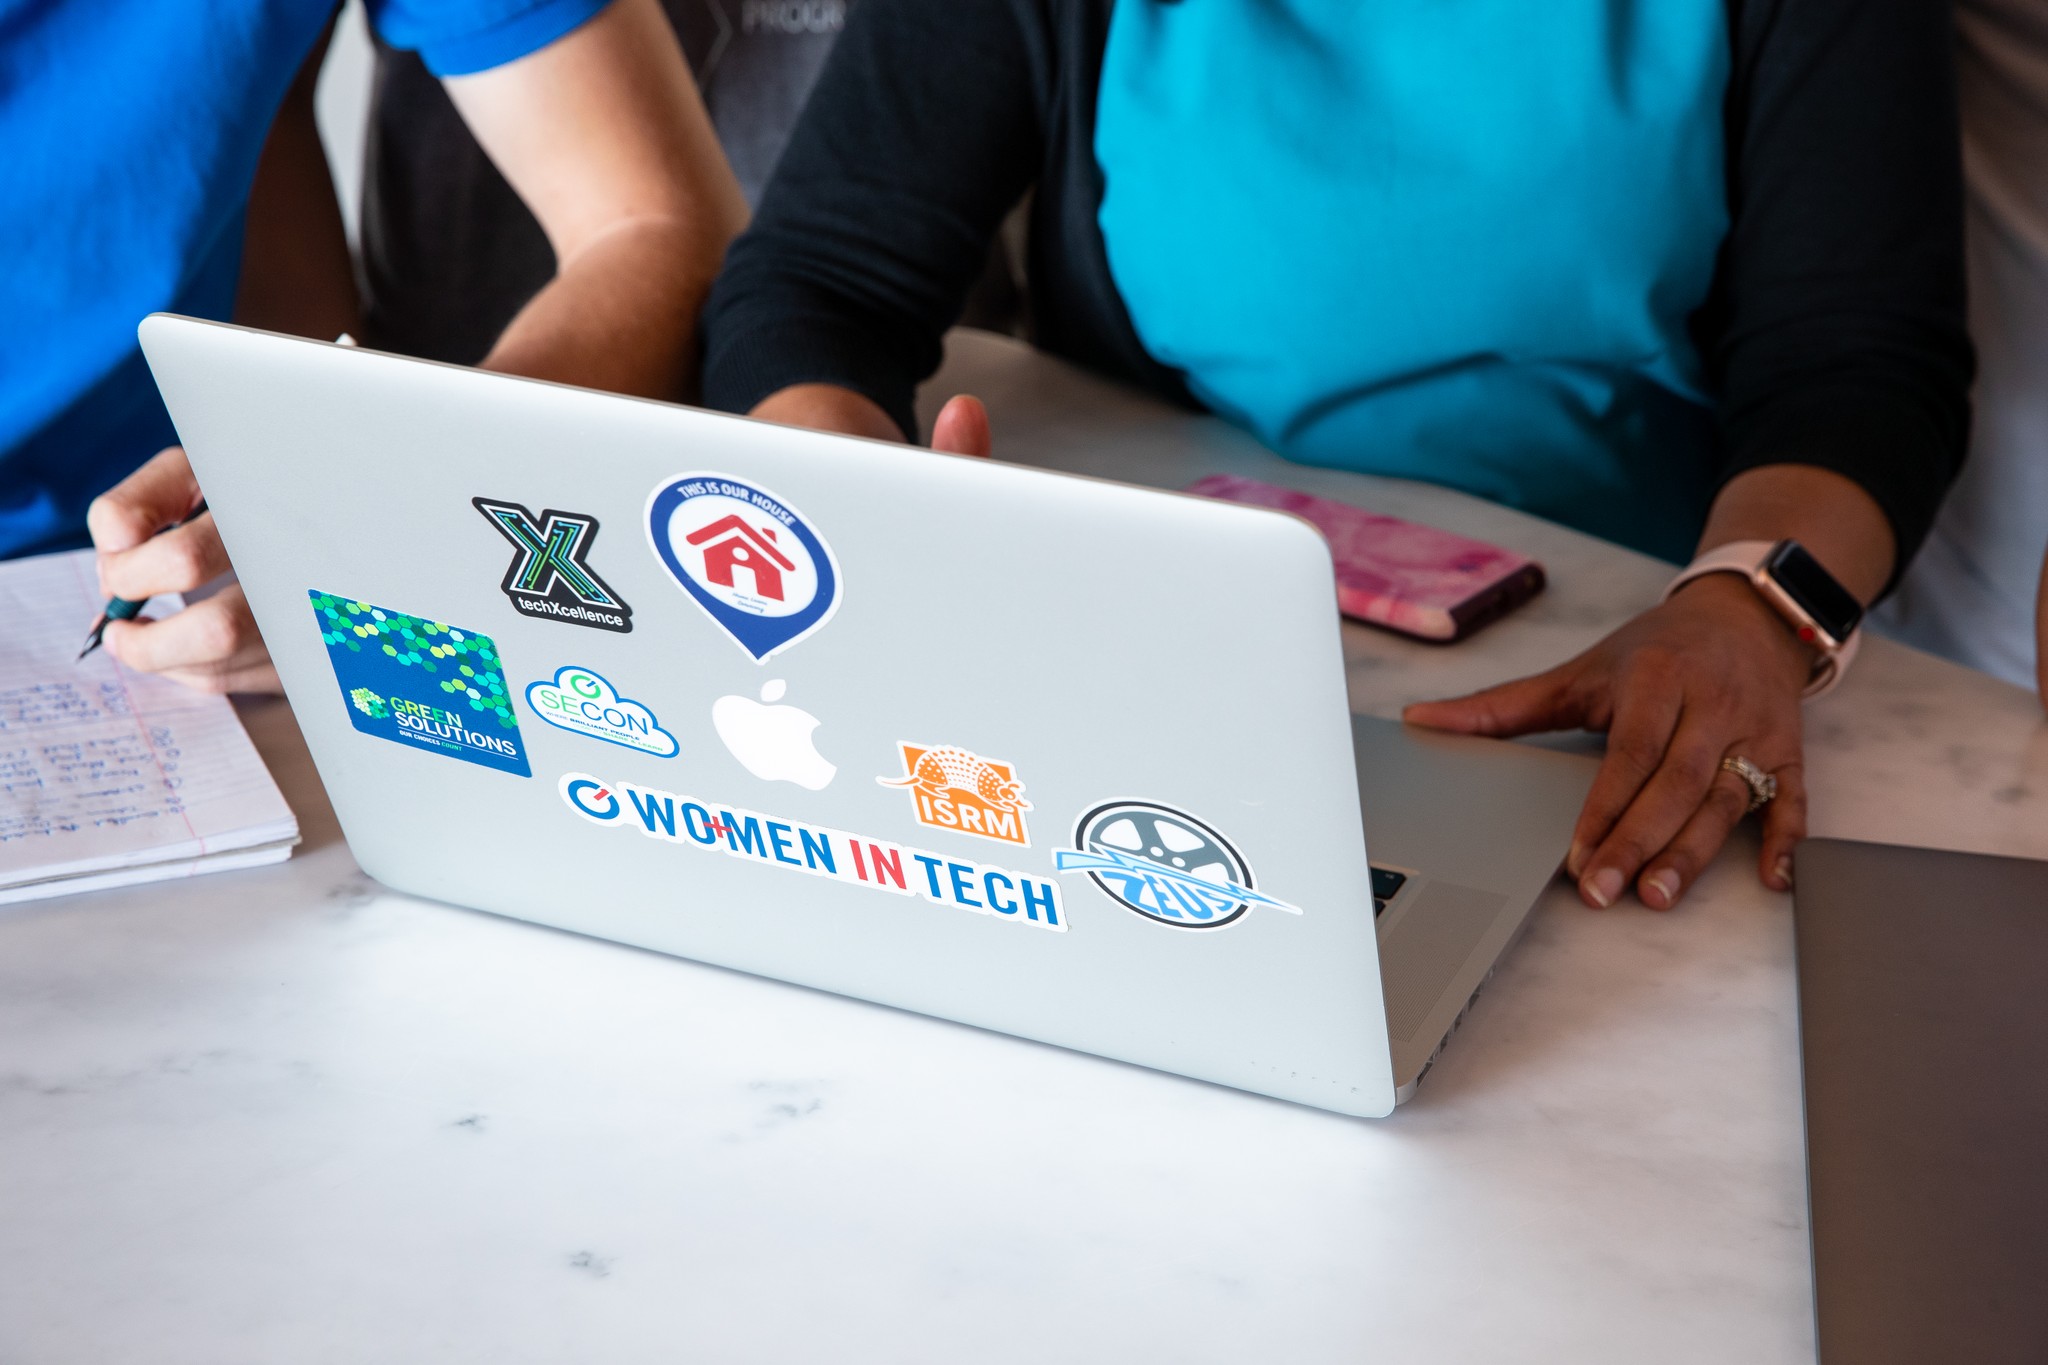 Close-up photo of the back of a laptop with stickers on it and two people seated next to each other facing the screen.